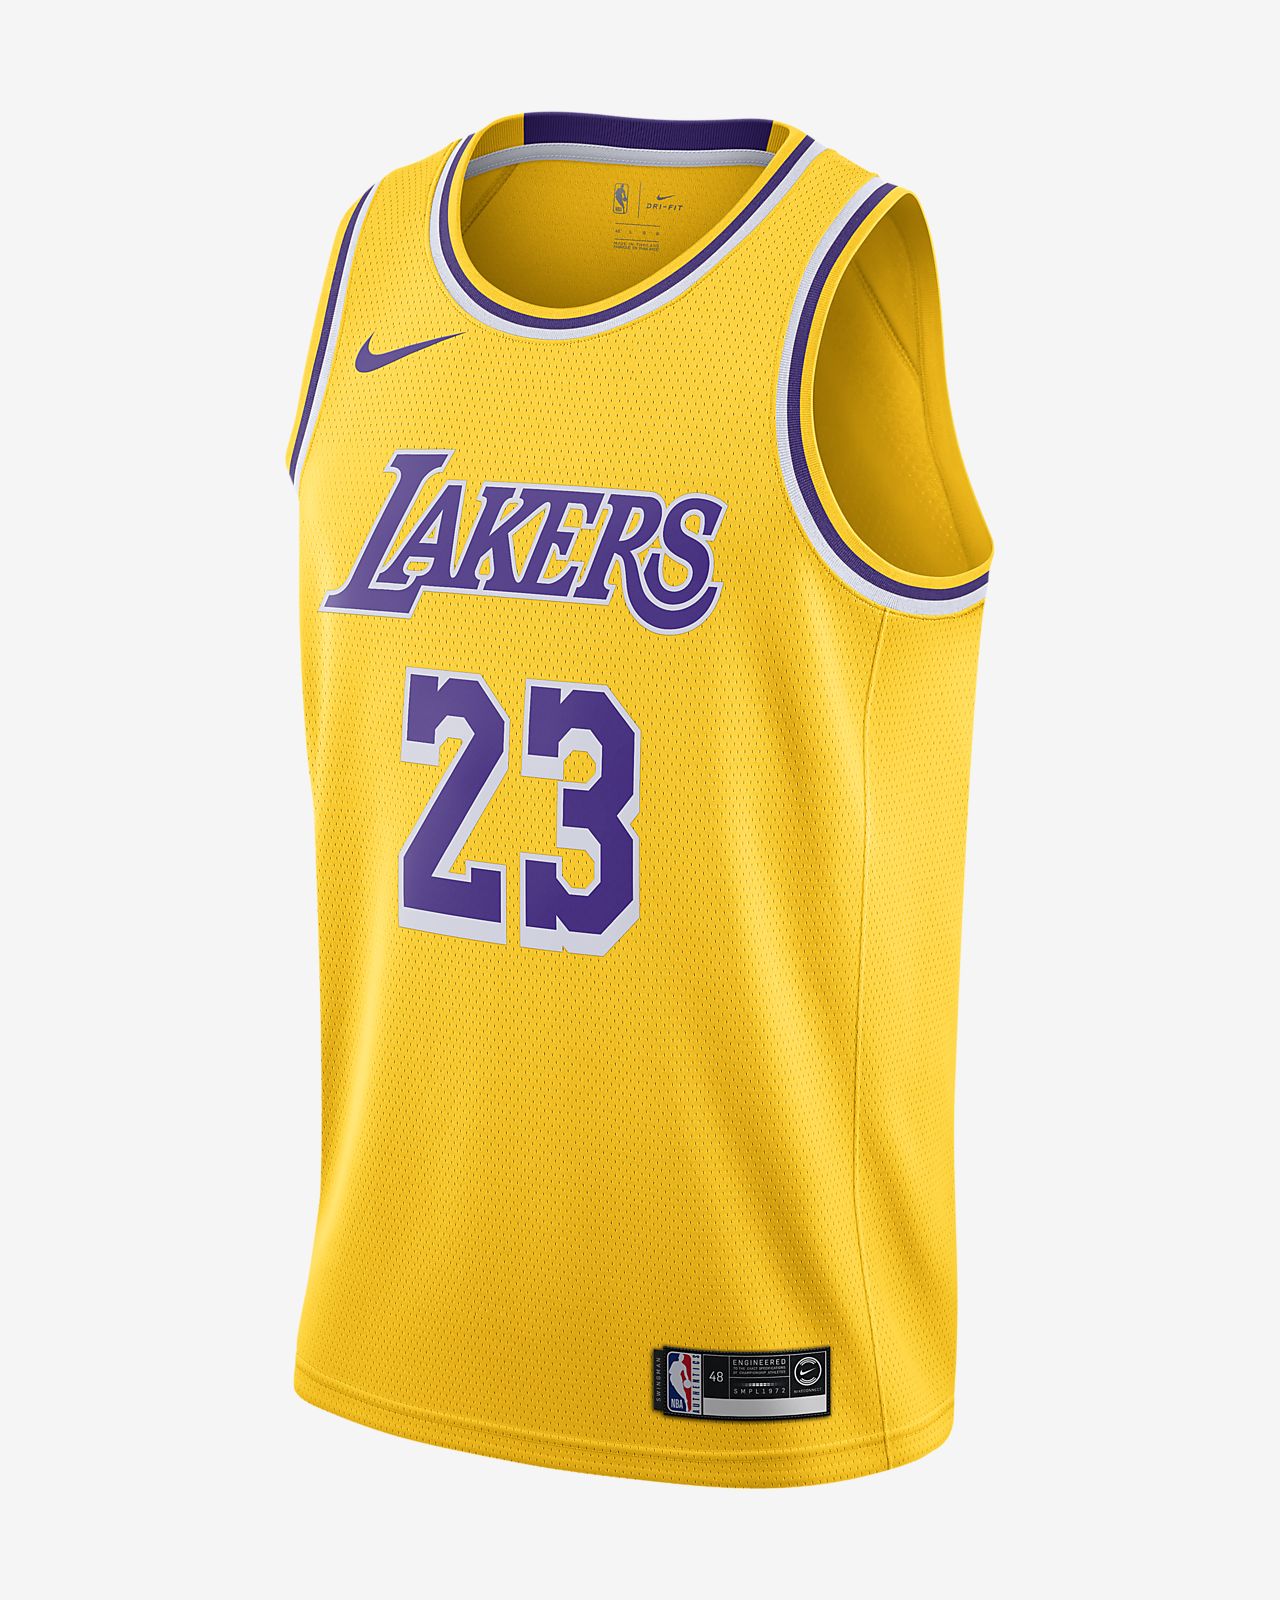 lebron lakers jersey official